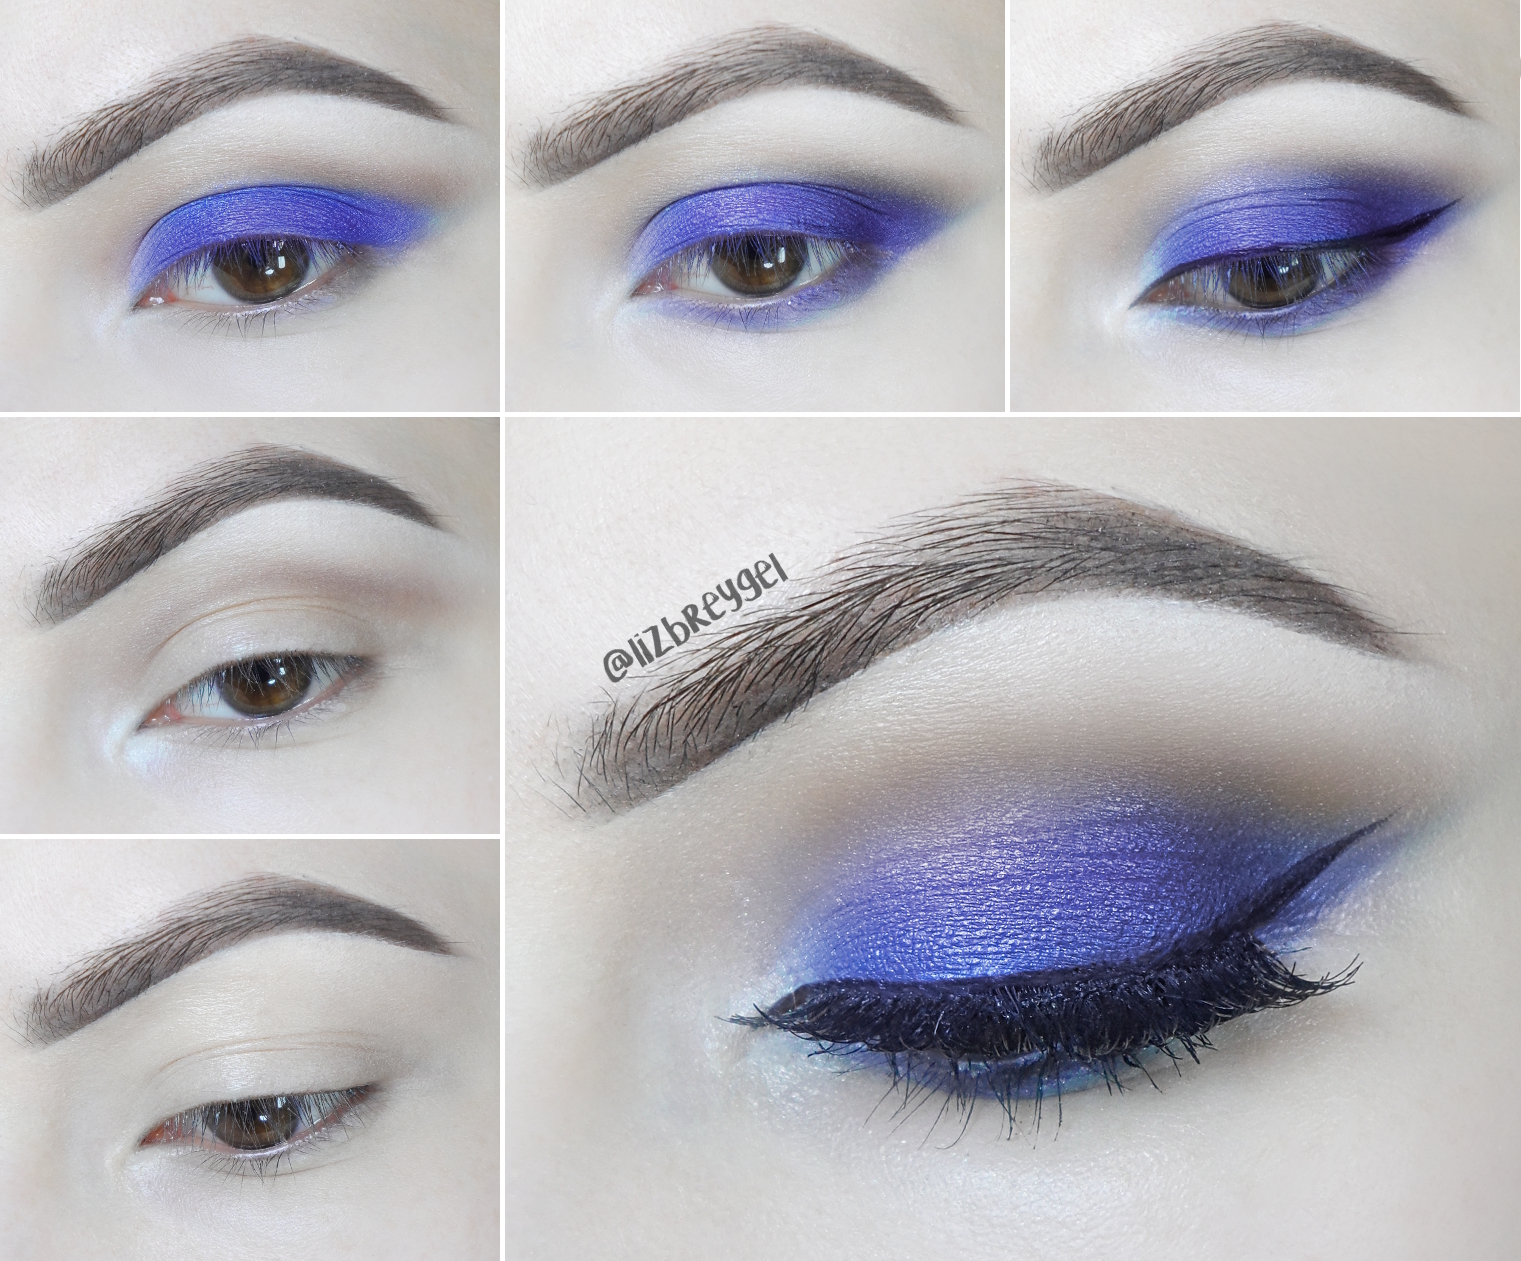 january girl blue smokey eye makeup tutorial step by step pictures red lips